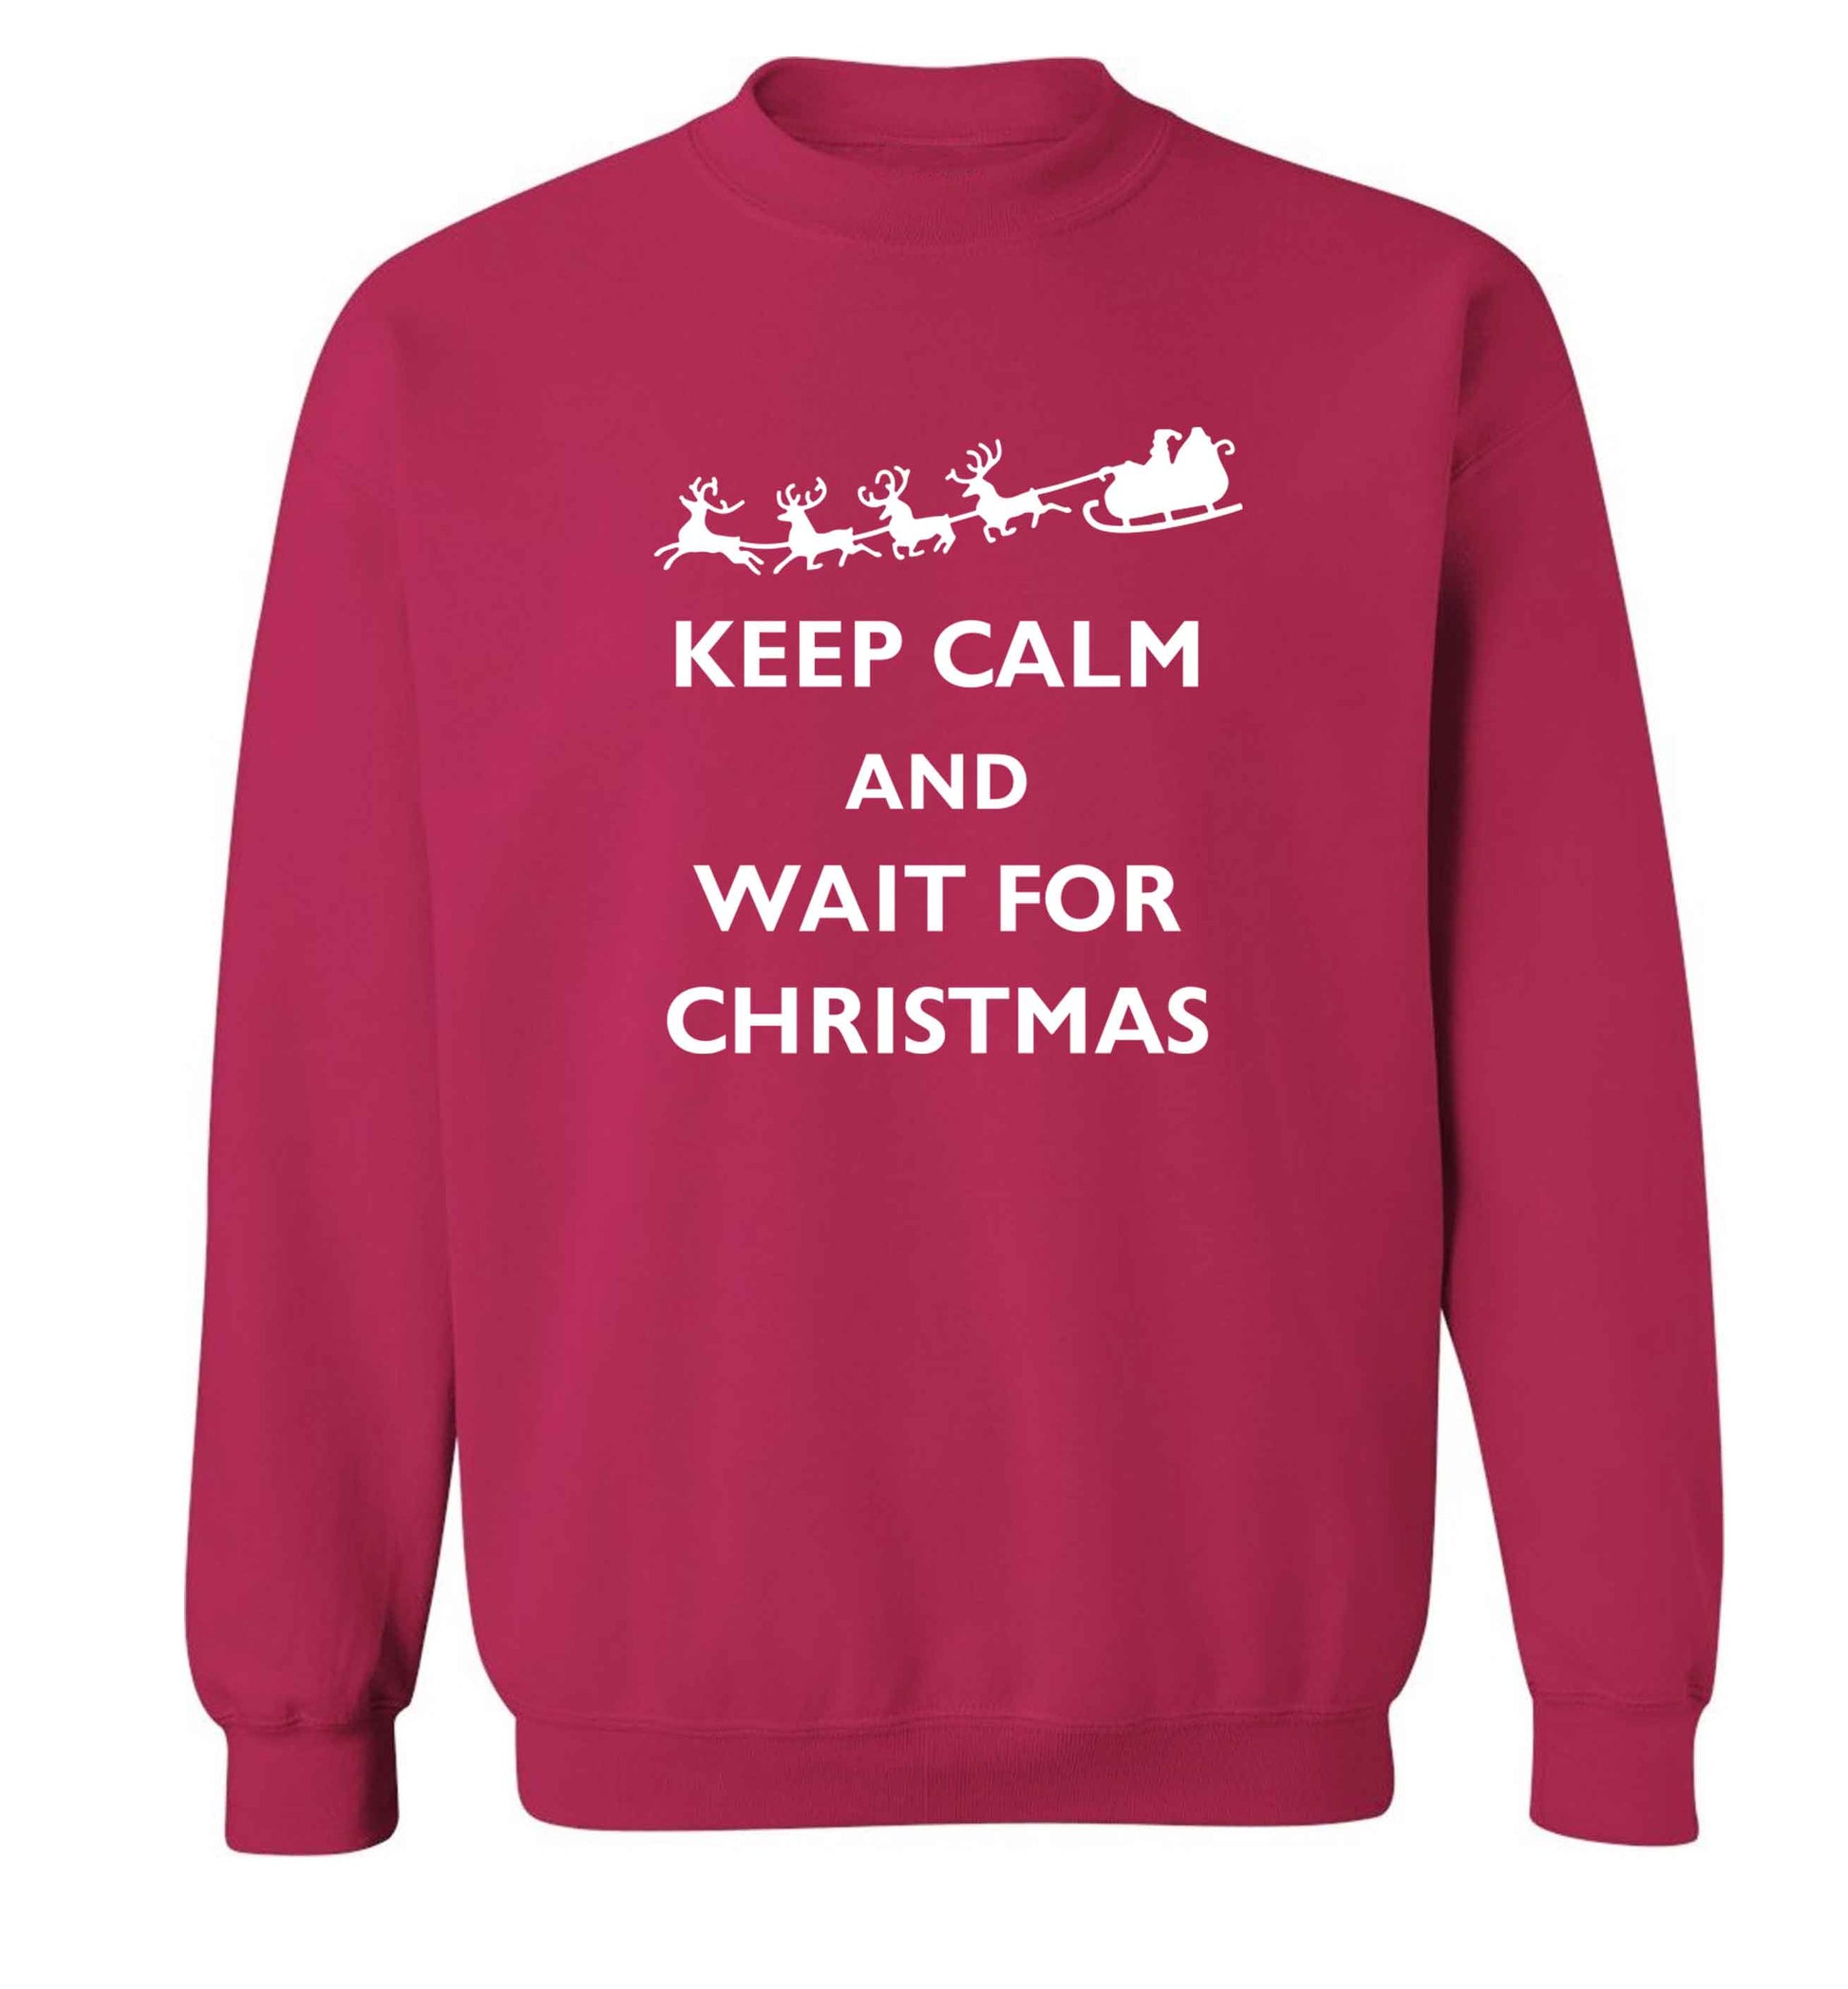 Keep calm and wait for Christmas adult's unisex pink sweater 2XL